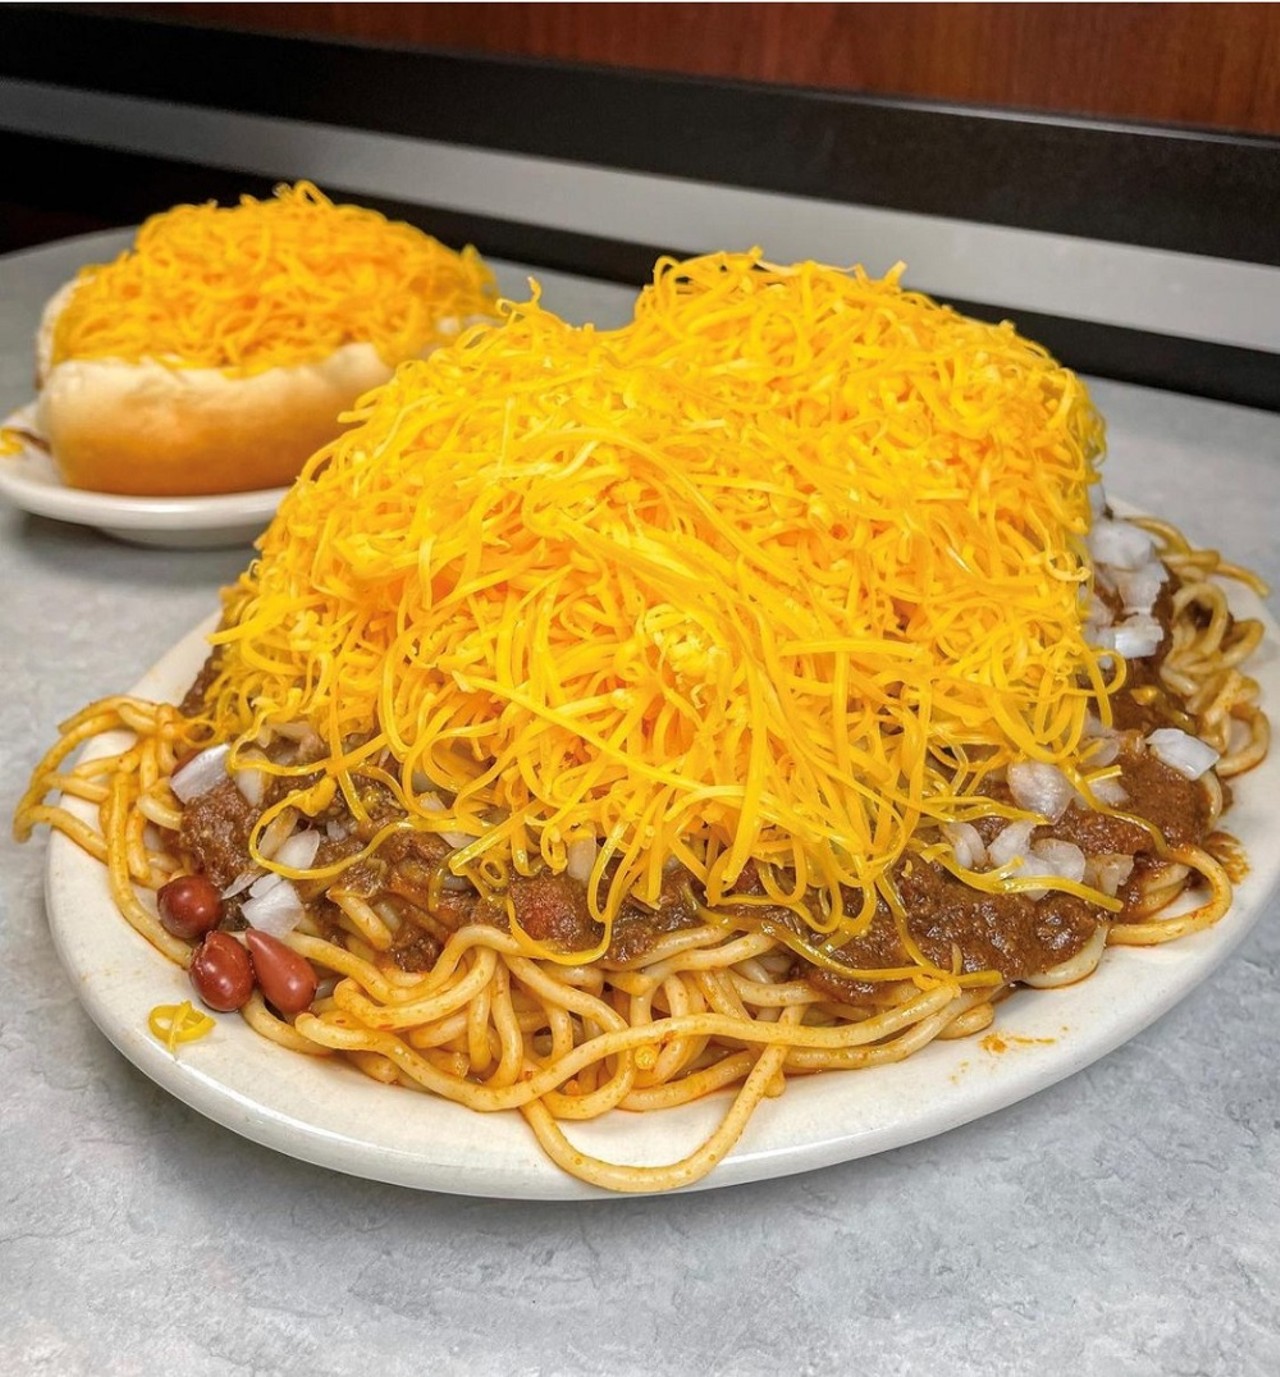 Cincinnati Chili
Nothing beats Cincinnati-style chili on a cold day, and, let’s face it, outside our professional sports teams, its the thing we’re best known for (and maybe the thing we’re most made fun of). From Skyline to Gold Star to the many neighborhood chili parlors dotted around the city, there are plenty of places to grab a coney or a whatever-number-you-want-way piled high with our signature chili and fresh cheese.